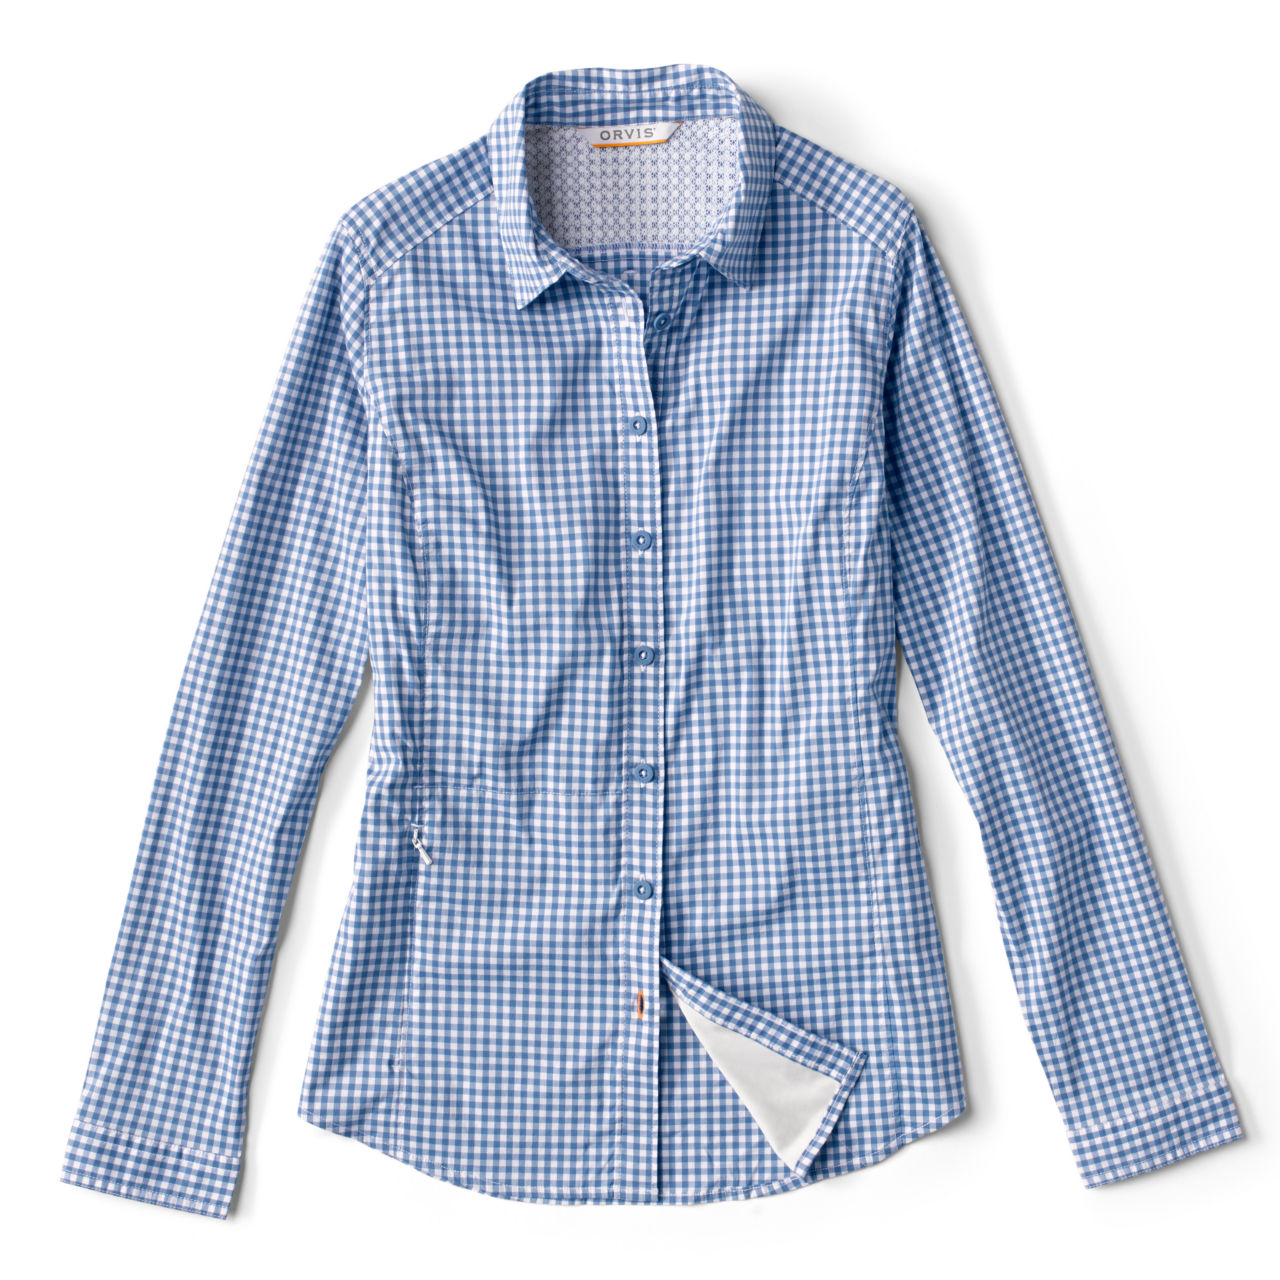 Women's River Guide Long-Sleeved Shirt - DUSTY BLUE CHECK image number 4